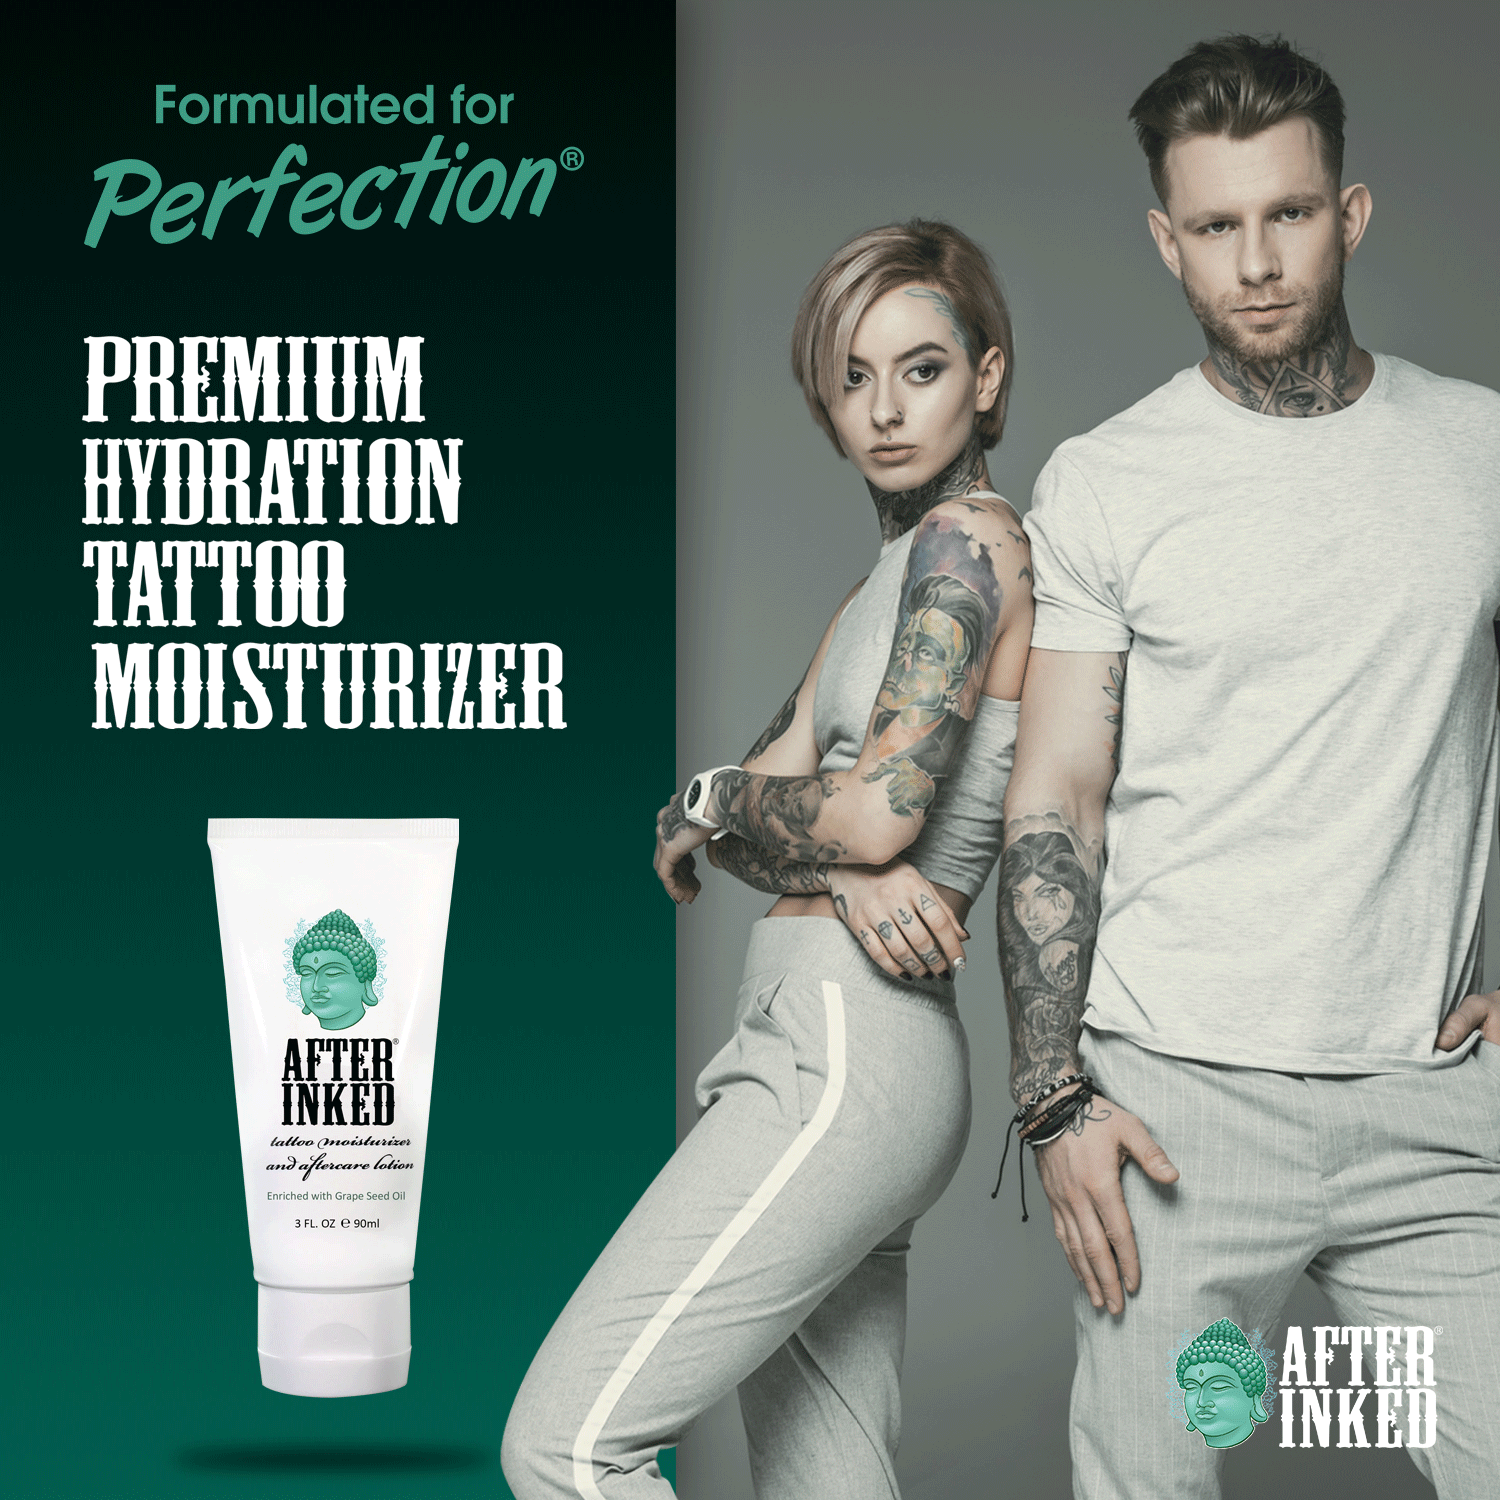 Premium hydration tattoo moisturizer and aftercare lotion